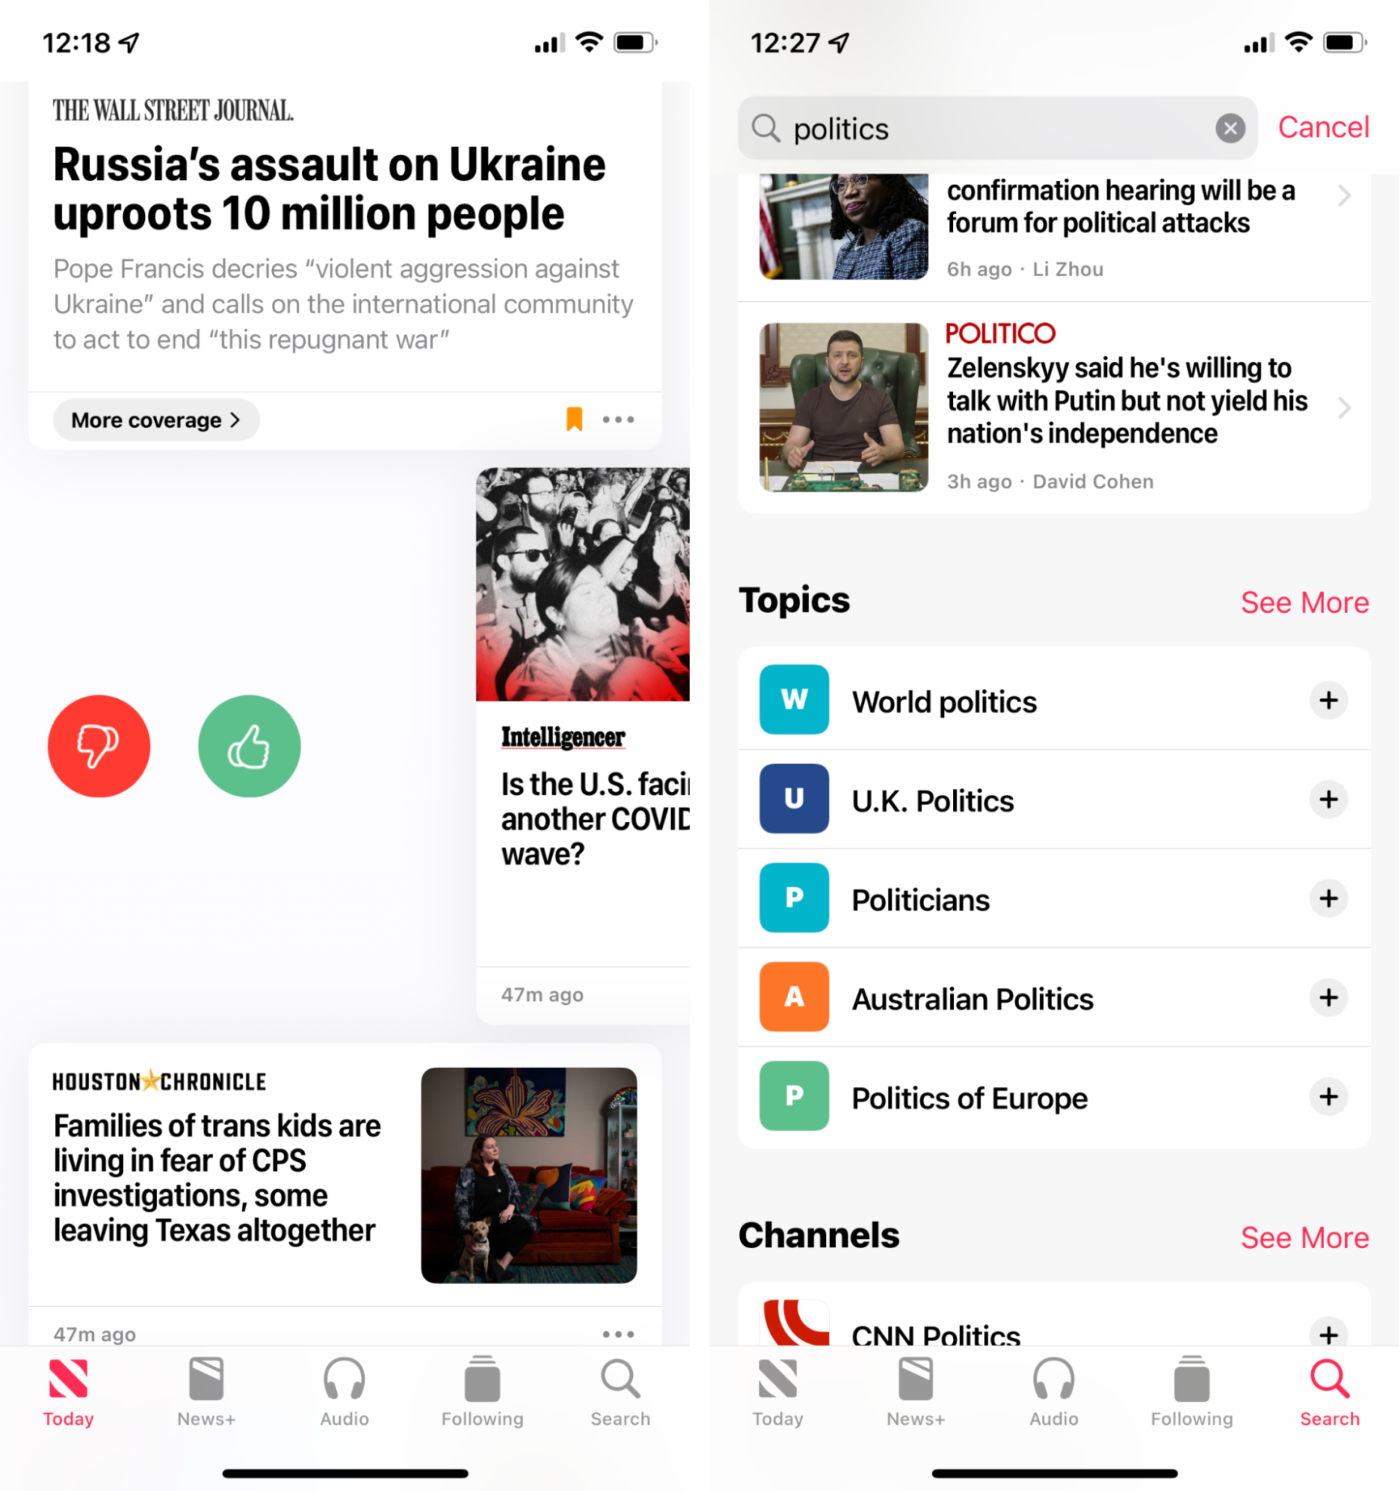 Apple News, our pick for the best news app for affordable access to top news sources